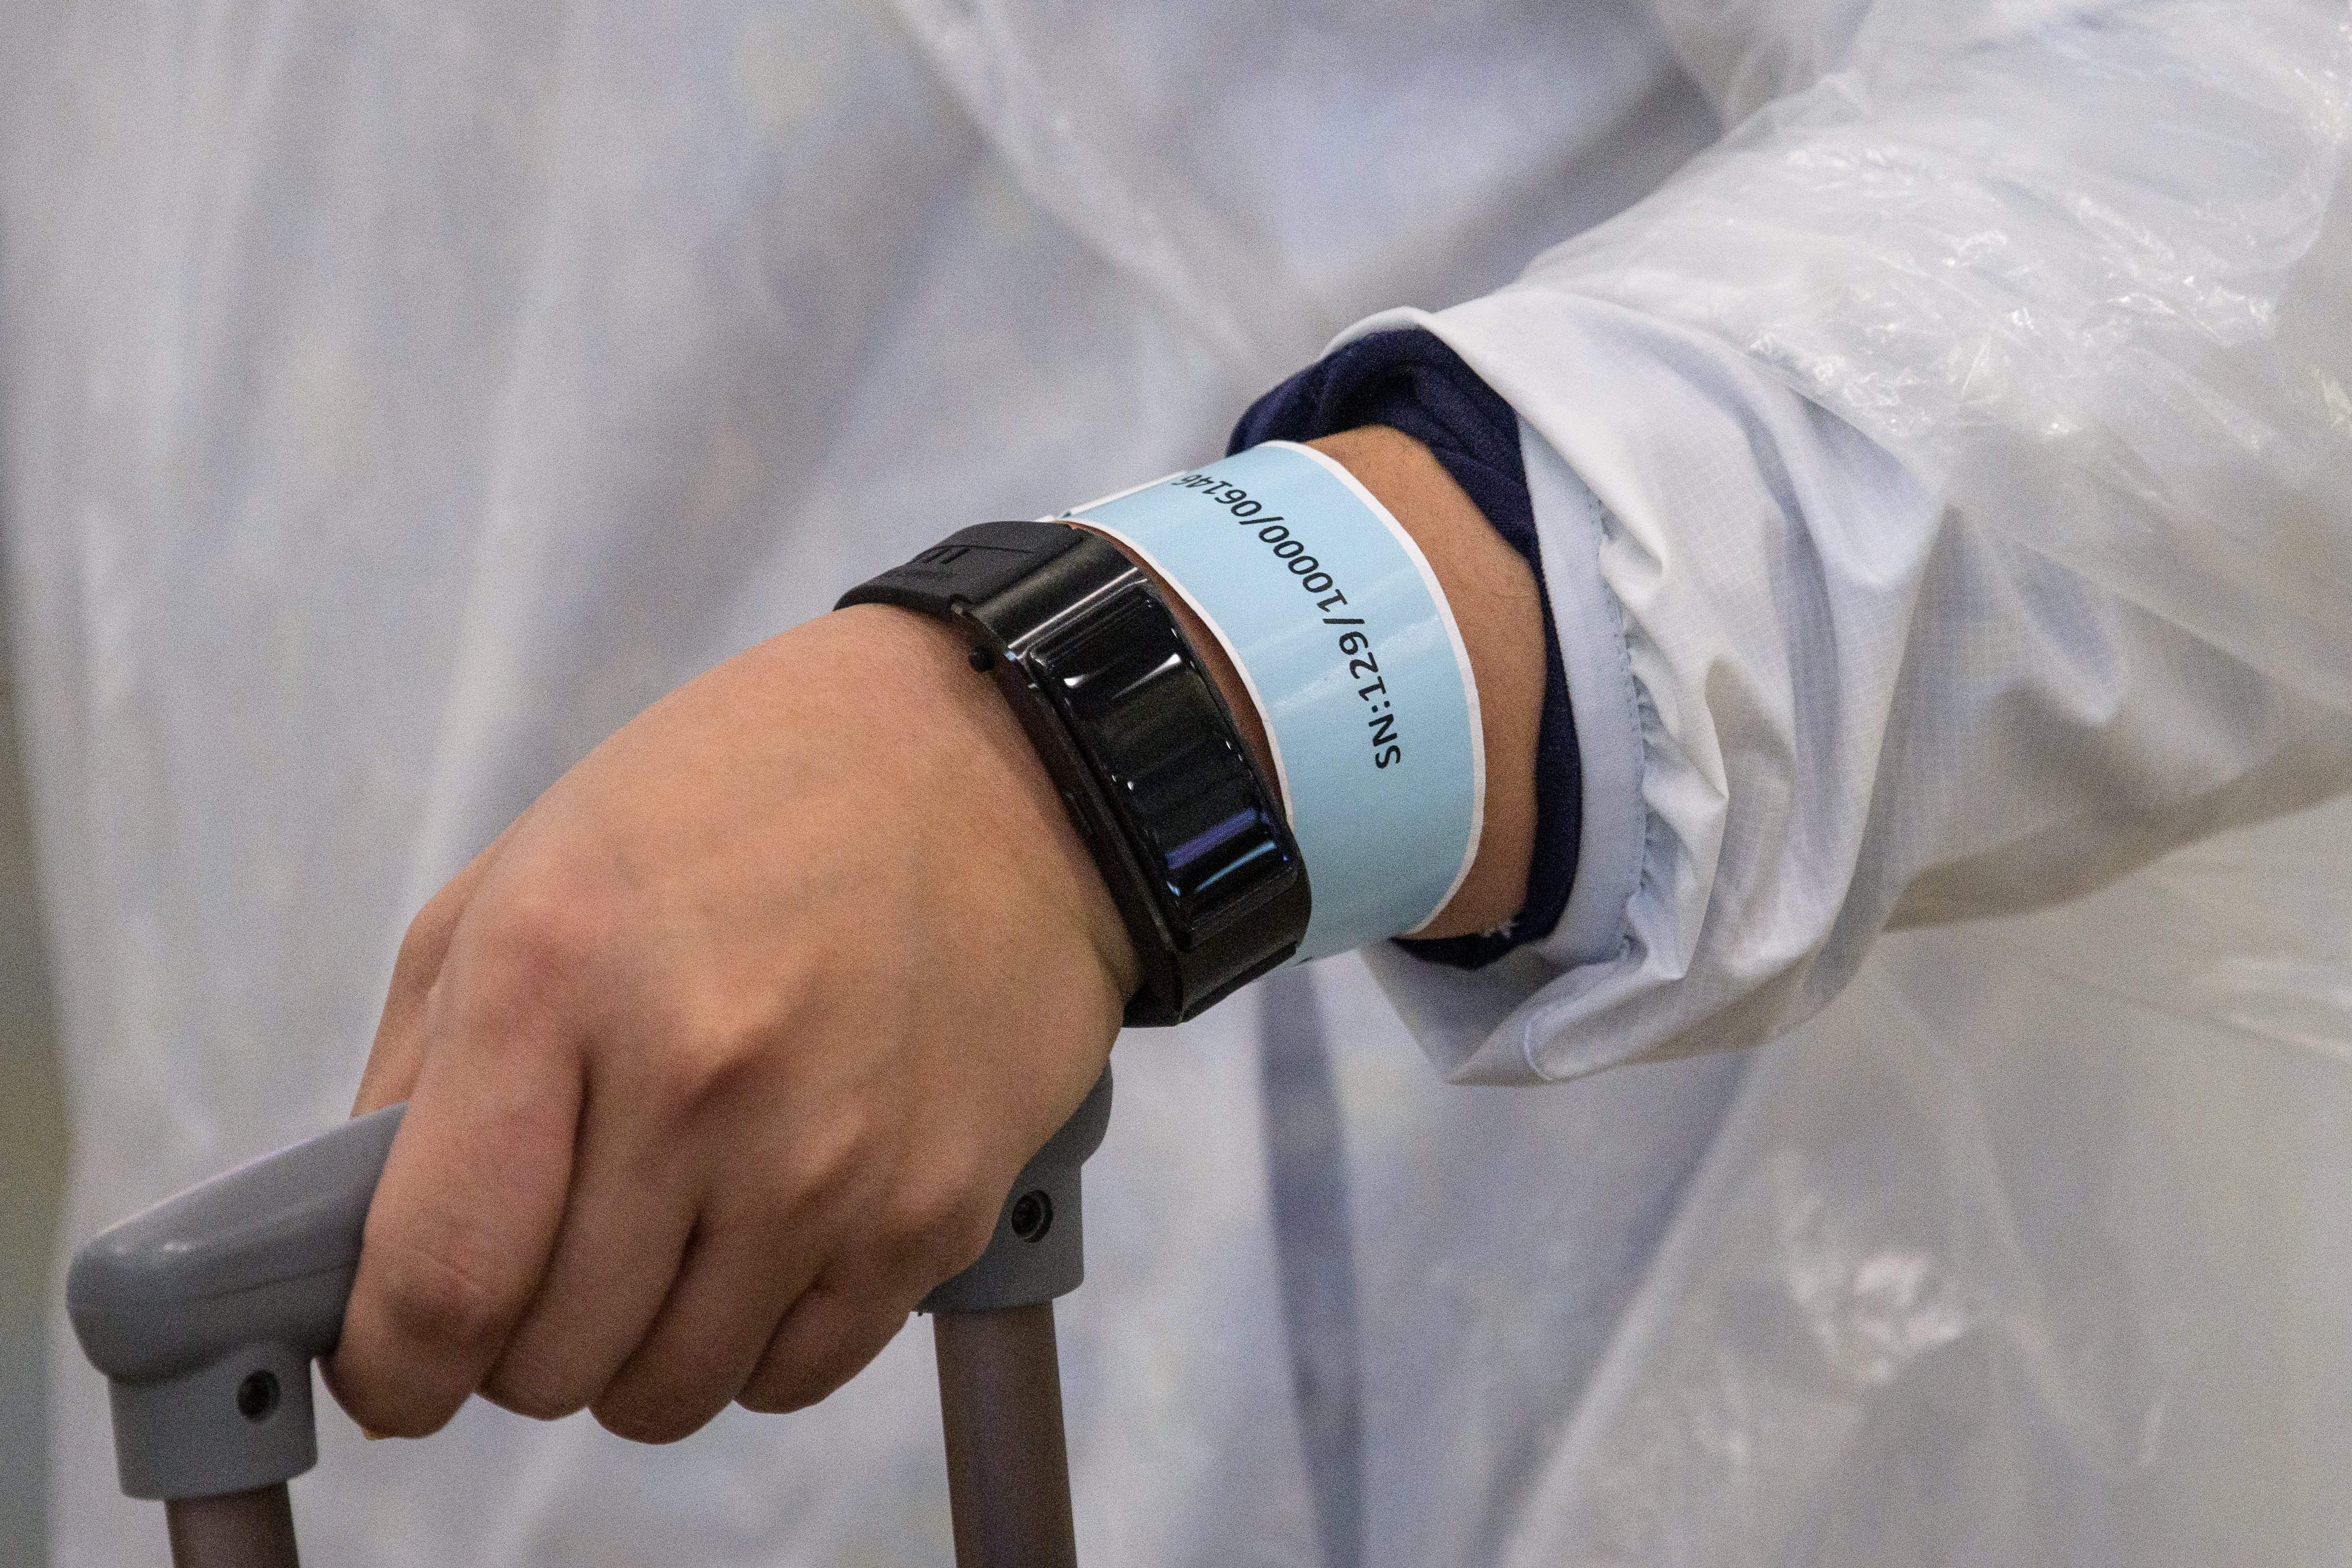 On March 18, Hong Kong authorities began ordering all arrivals from overseas to wear electronic bracelets.